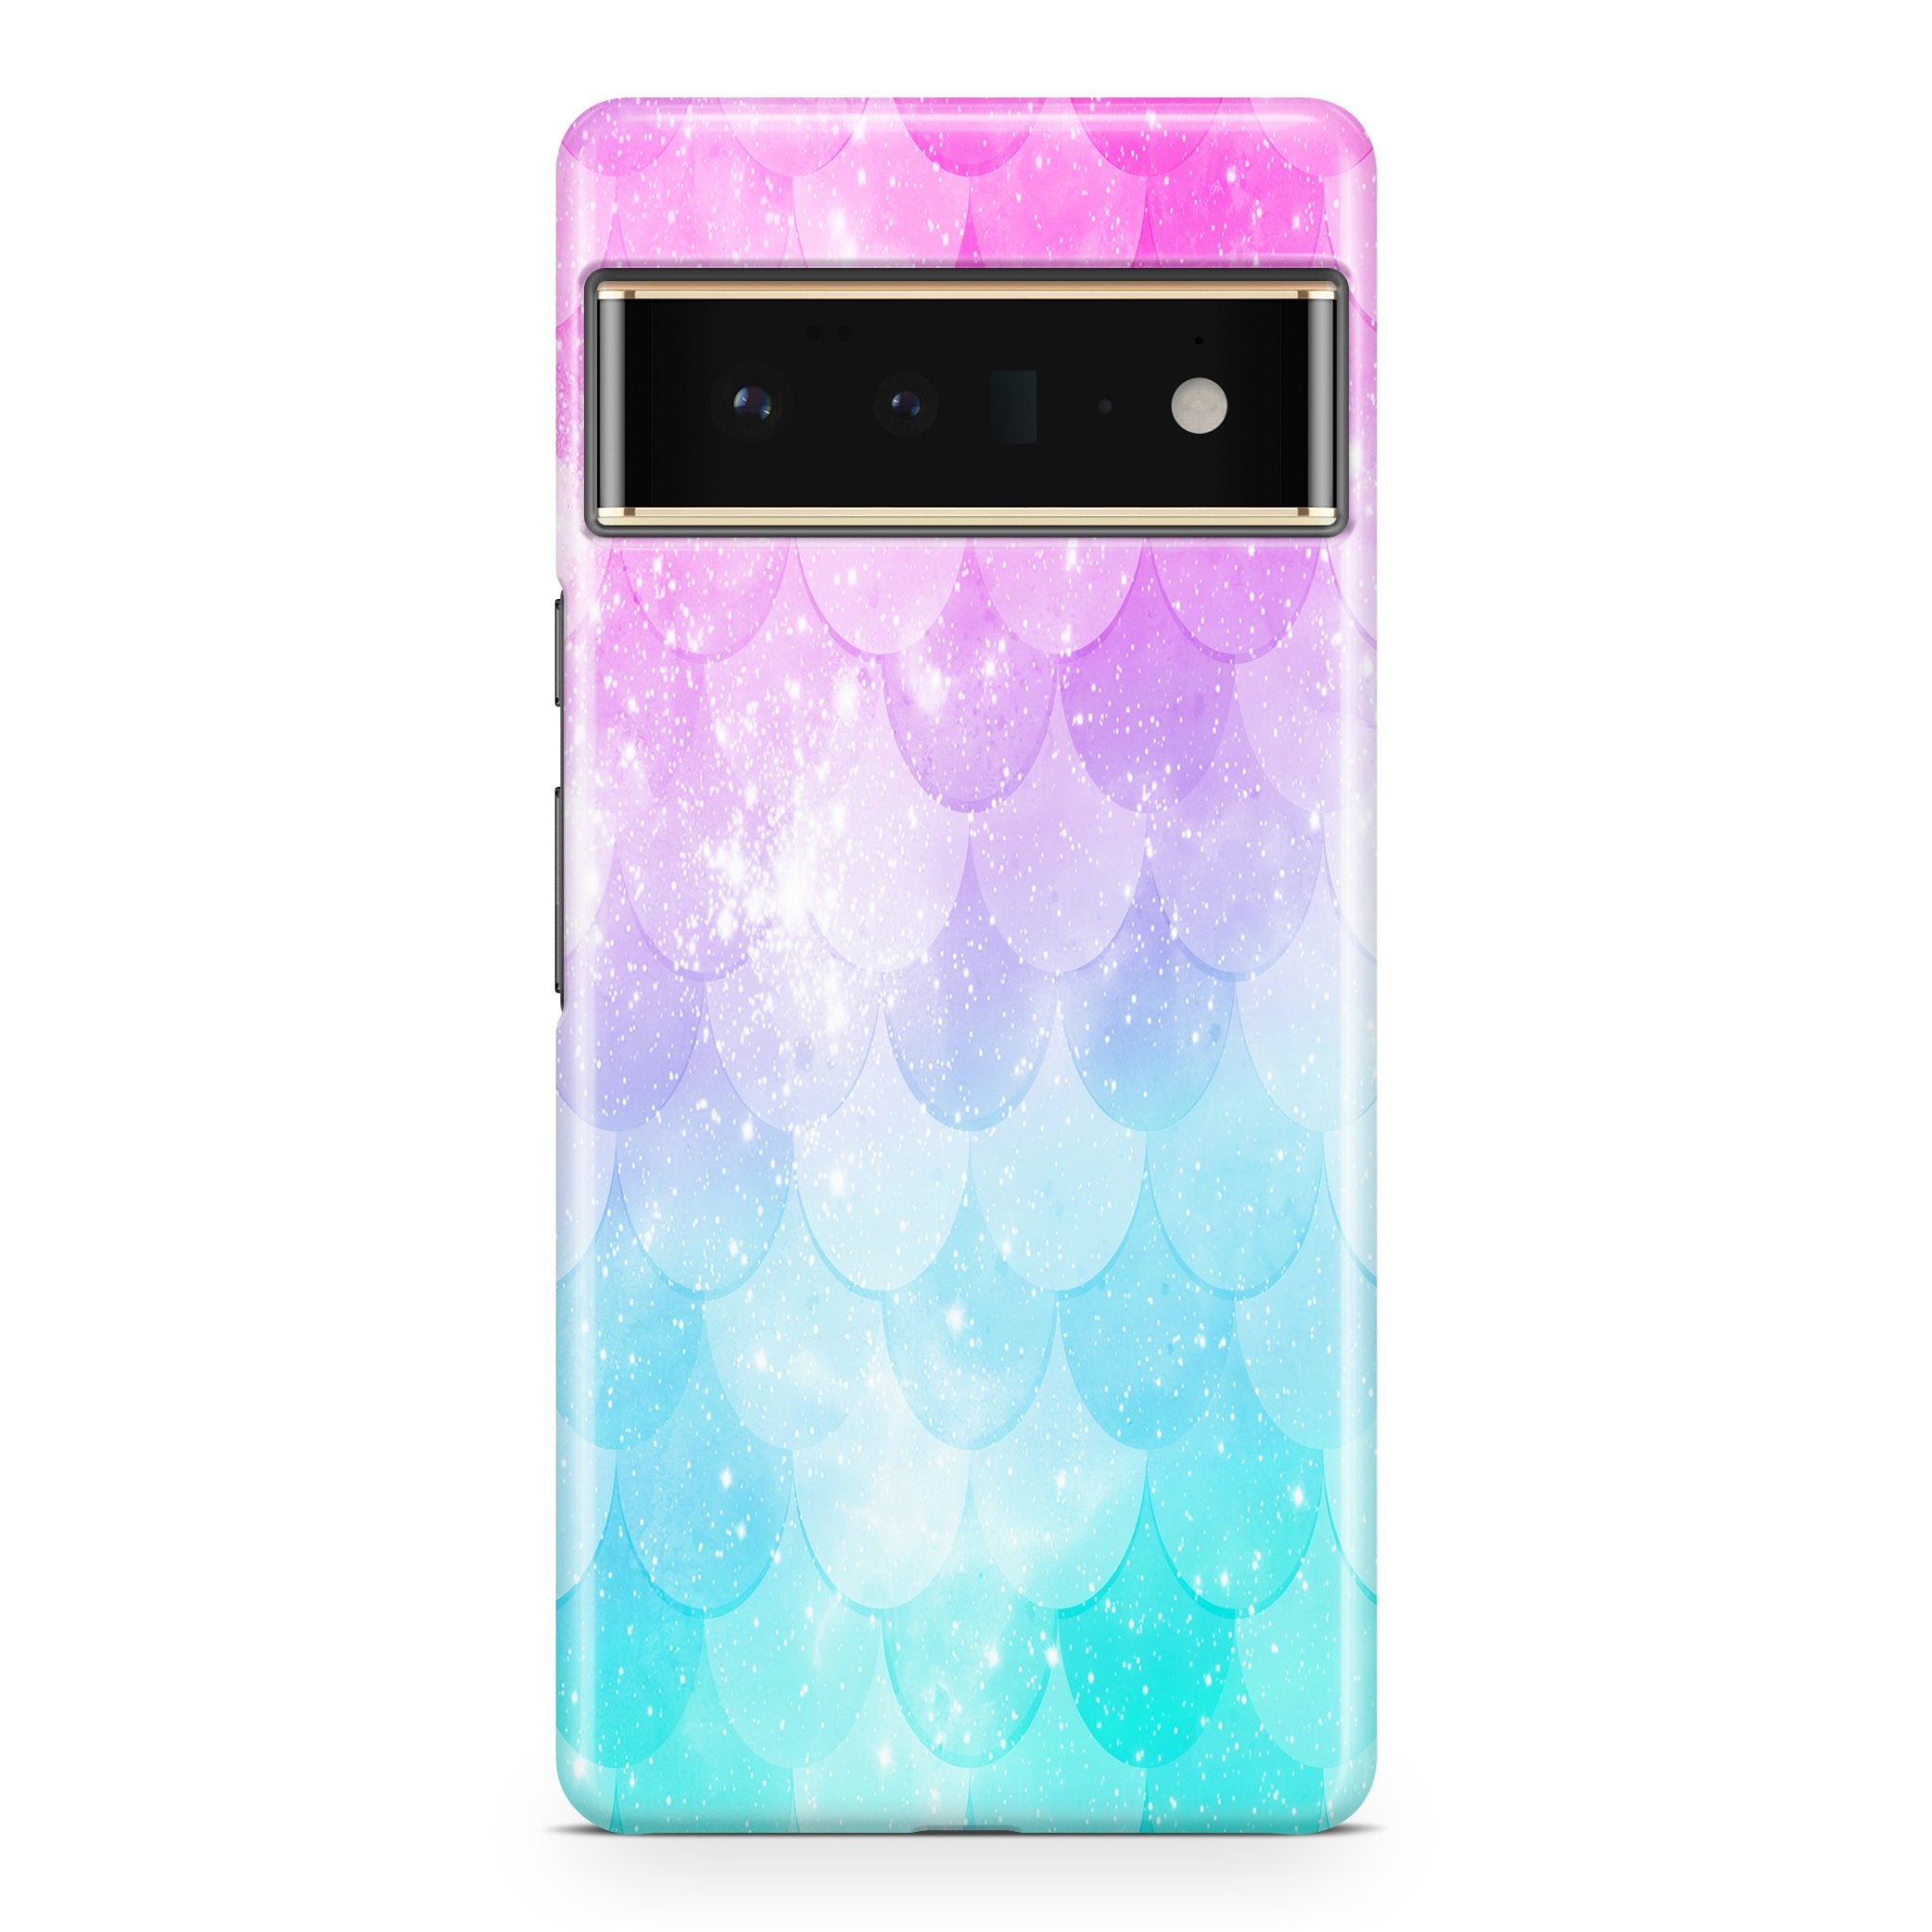 Rainbow Mermaid Scale - Google phone case designs by CaseSwagger